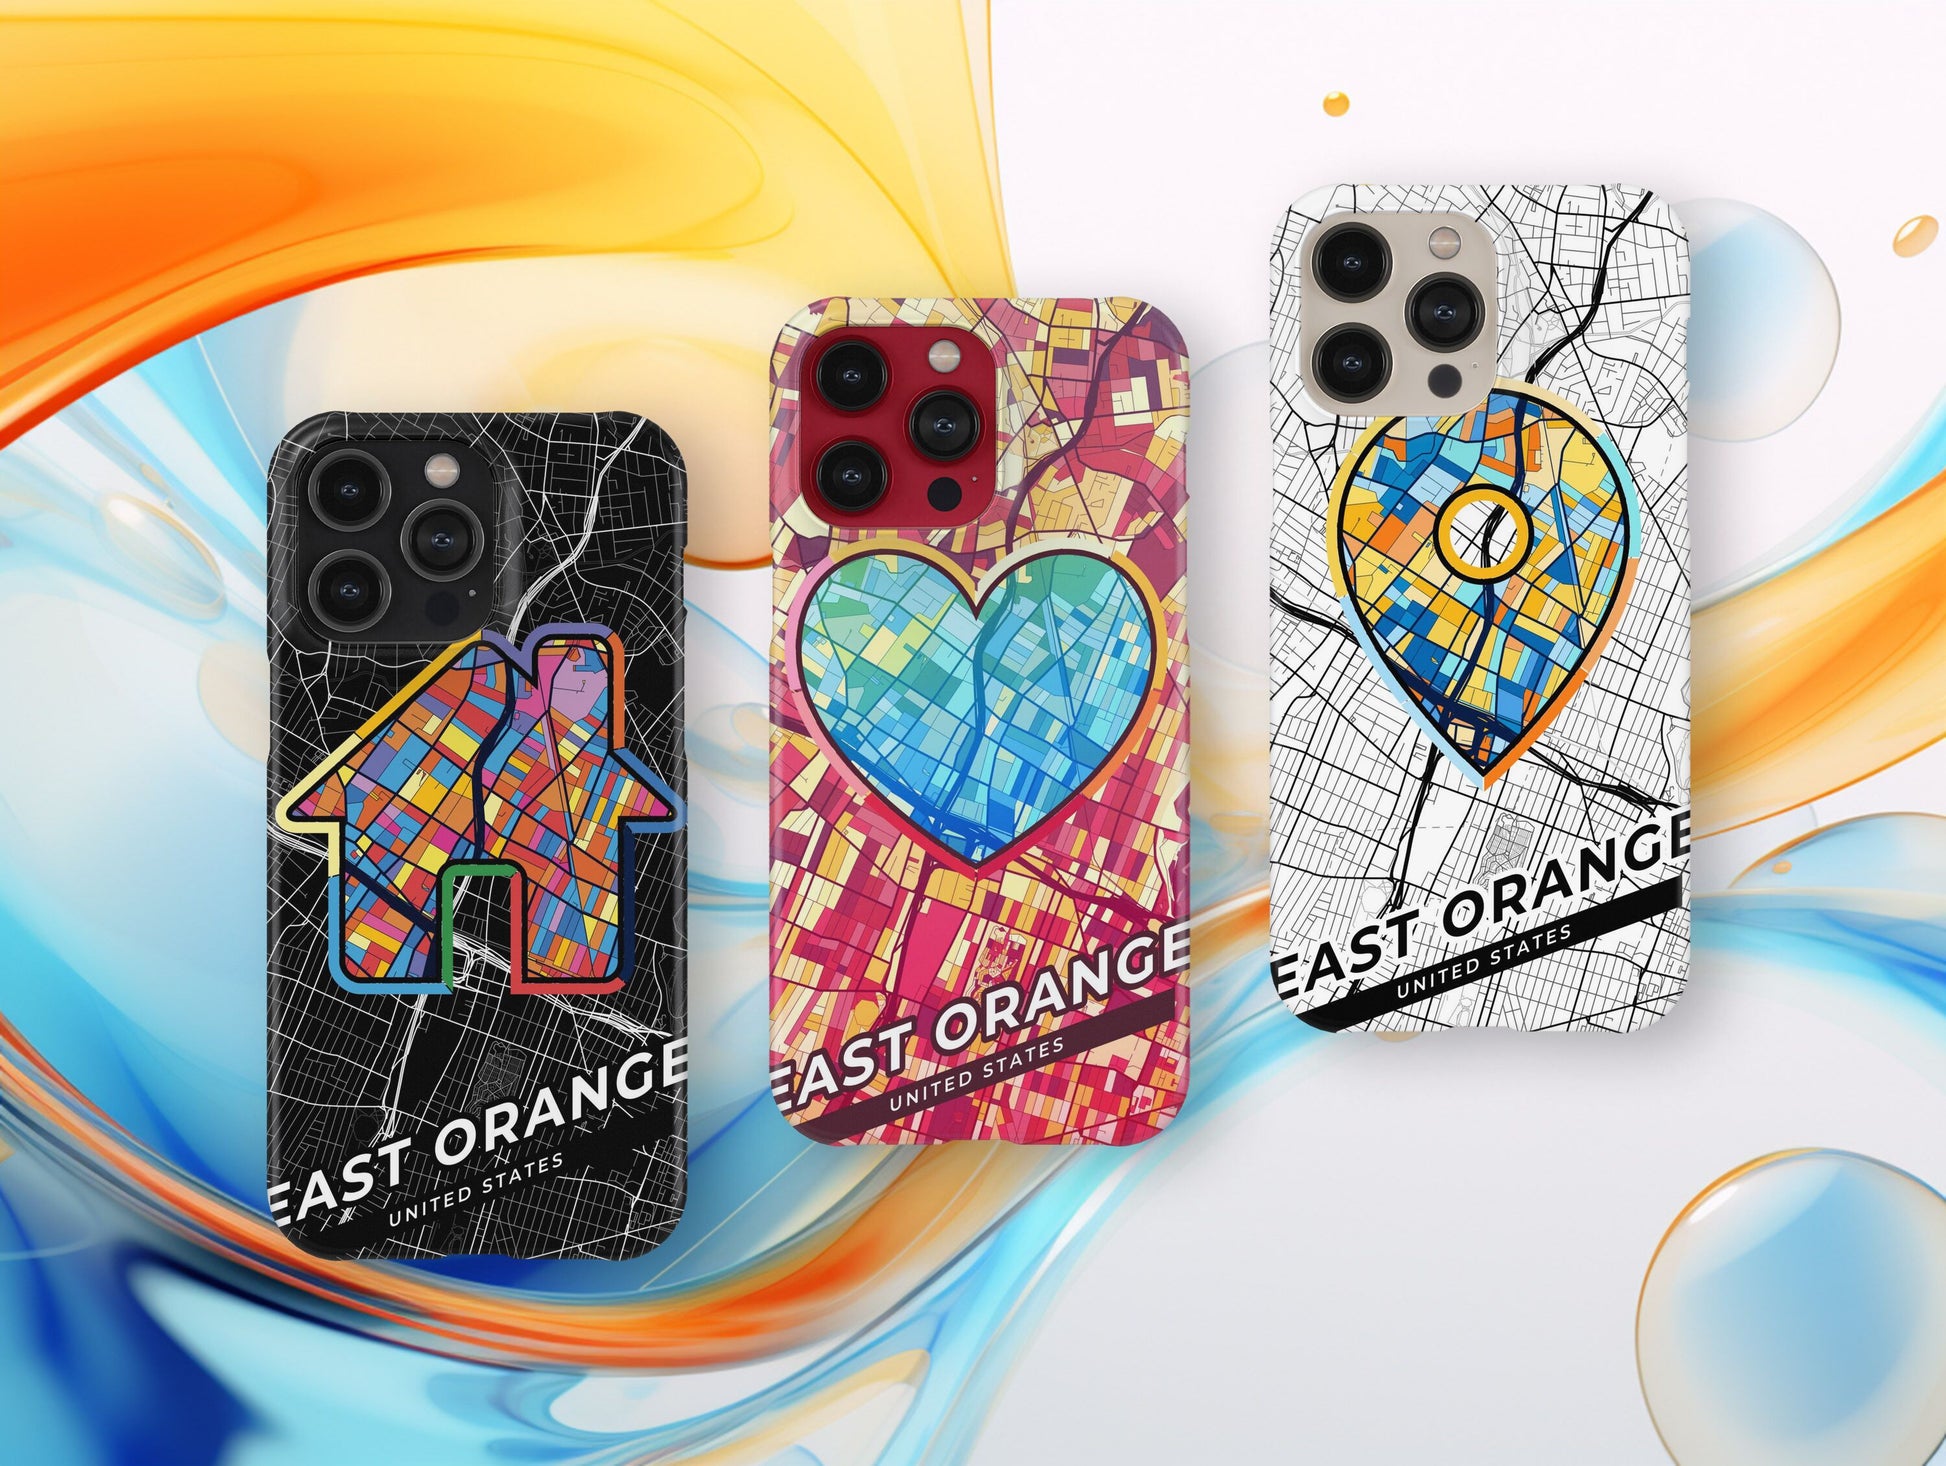 East Orange New Jersey slim phone case with colorful icon. Birthday, wedding or housewarming gift. Couple match cases.